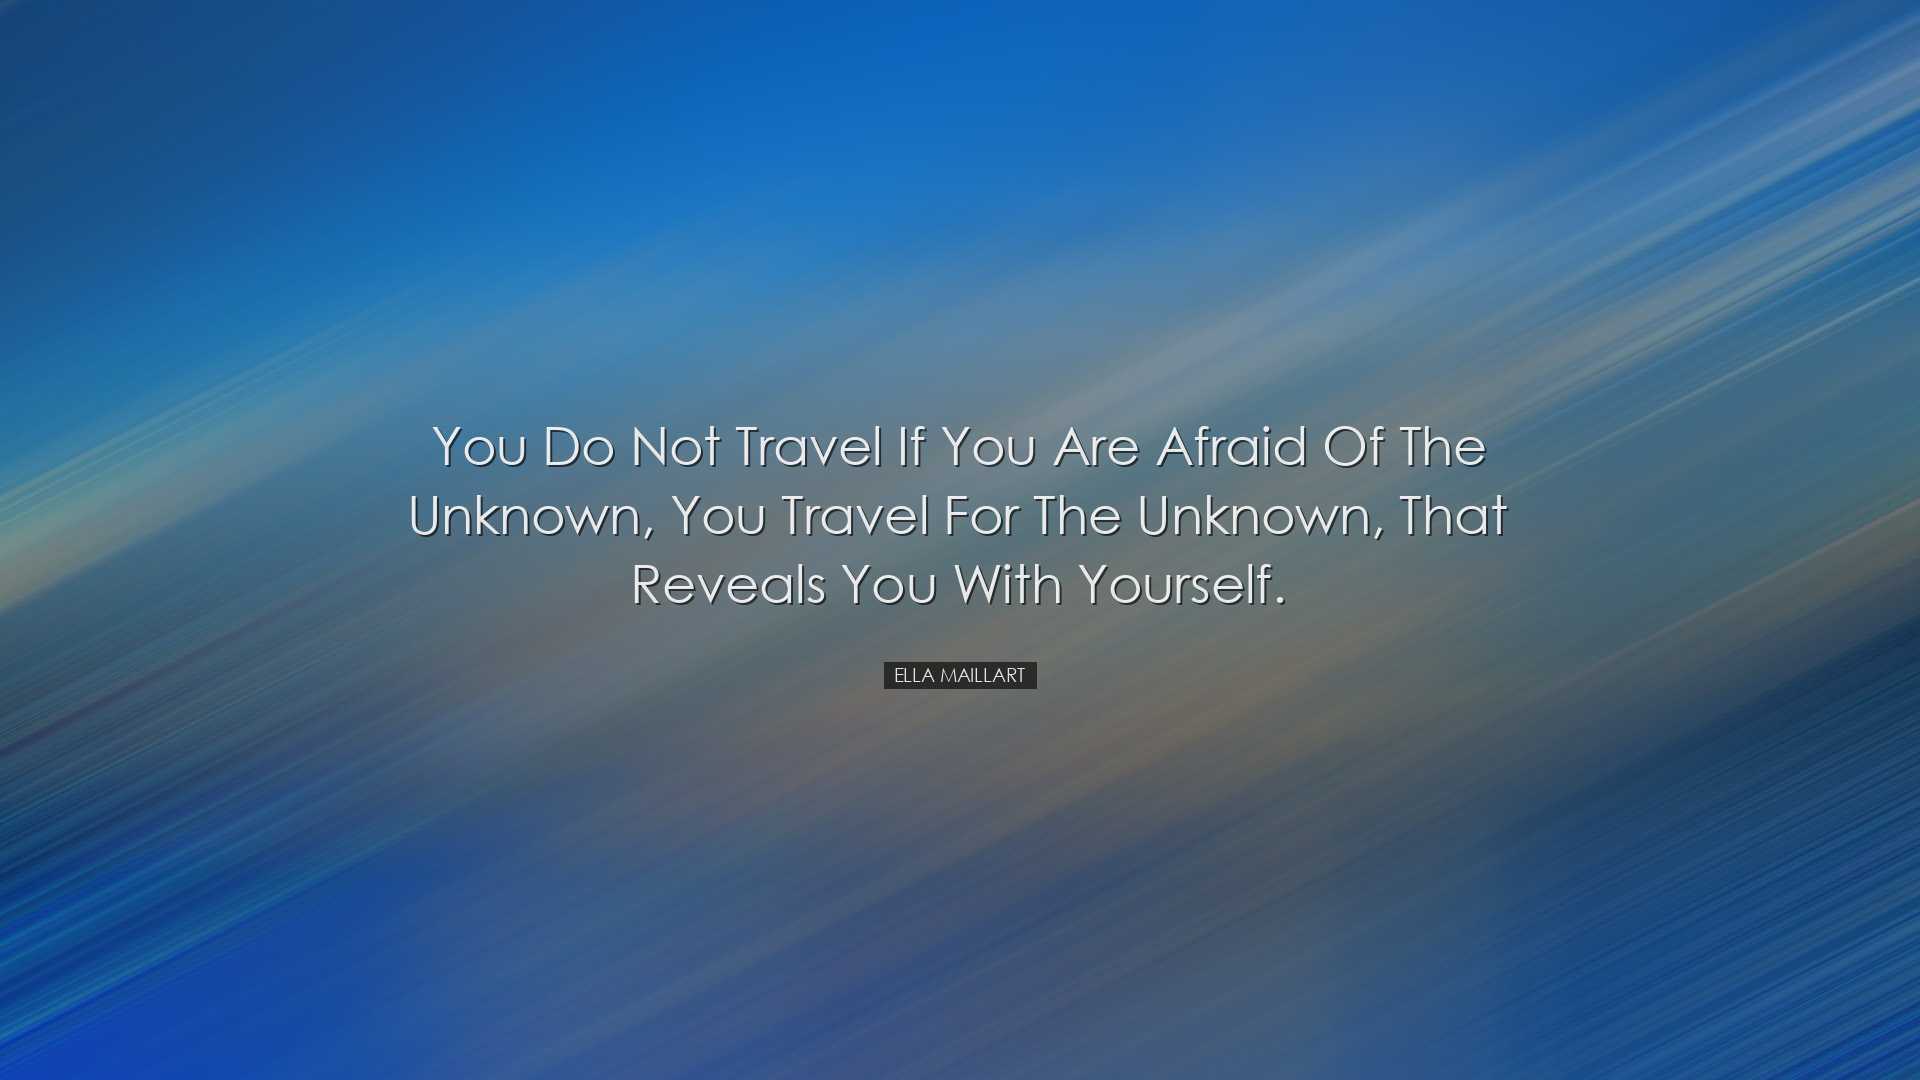 You do not travel if you are afraid of the unknown, you travel for